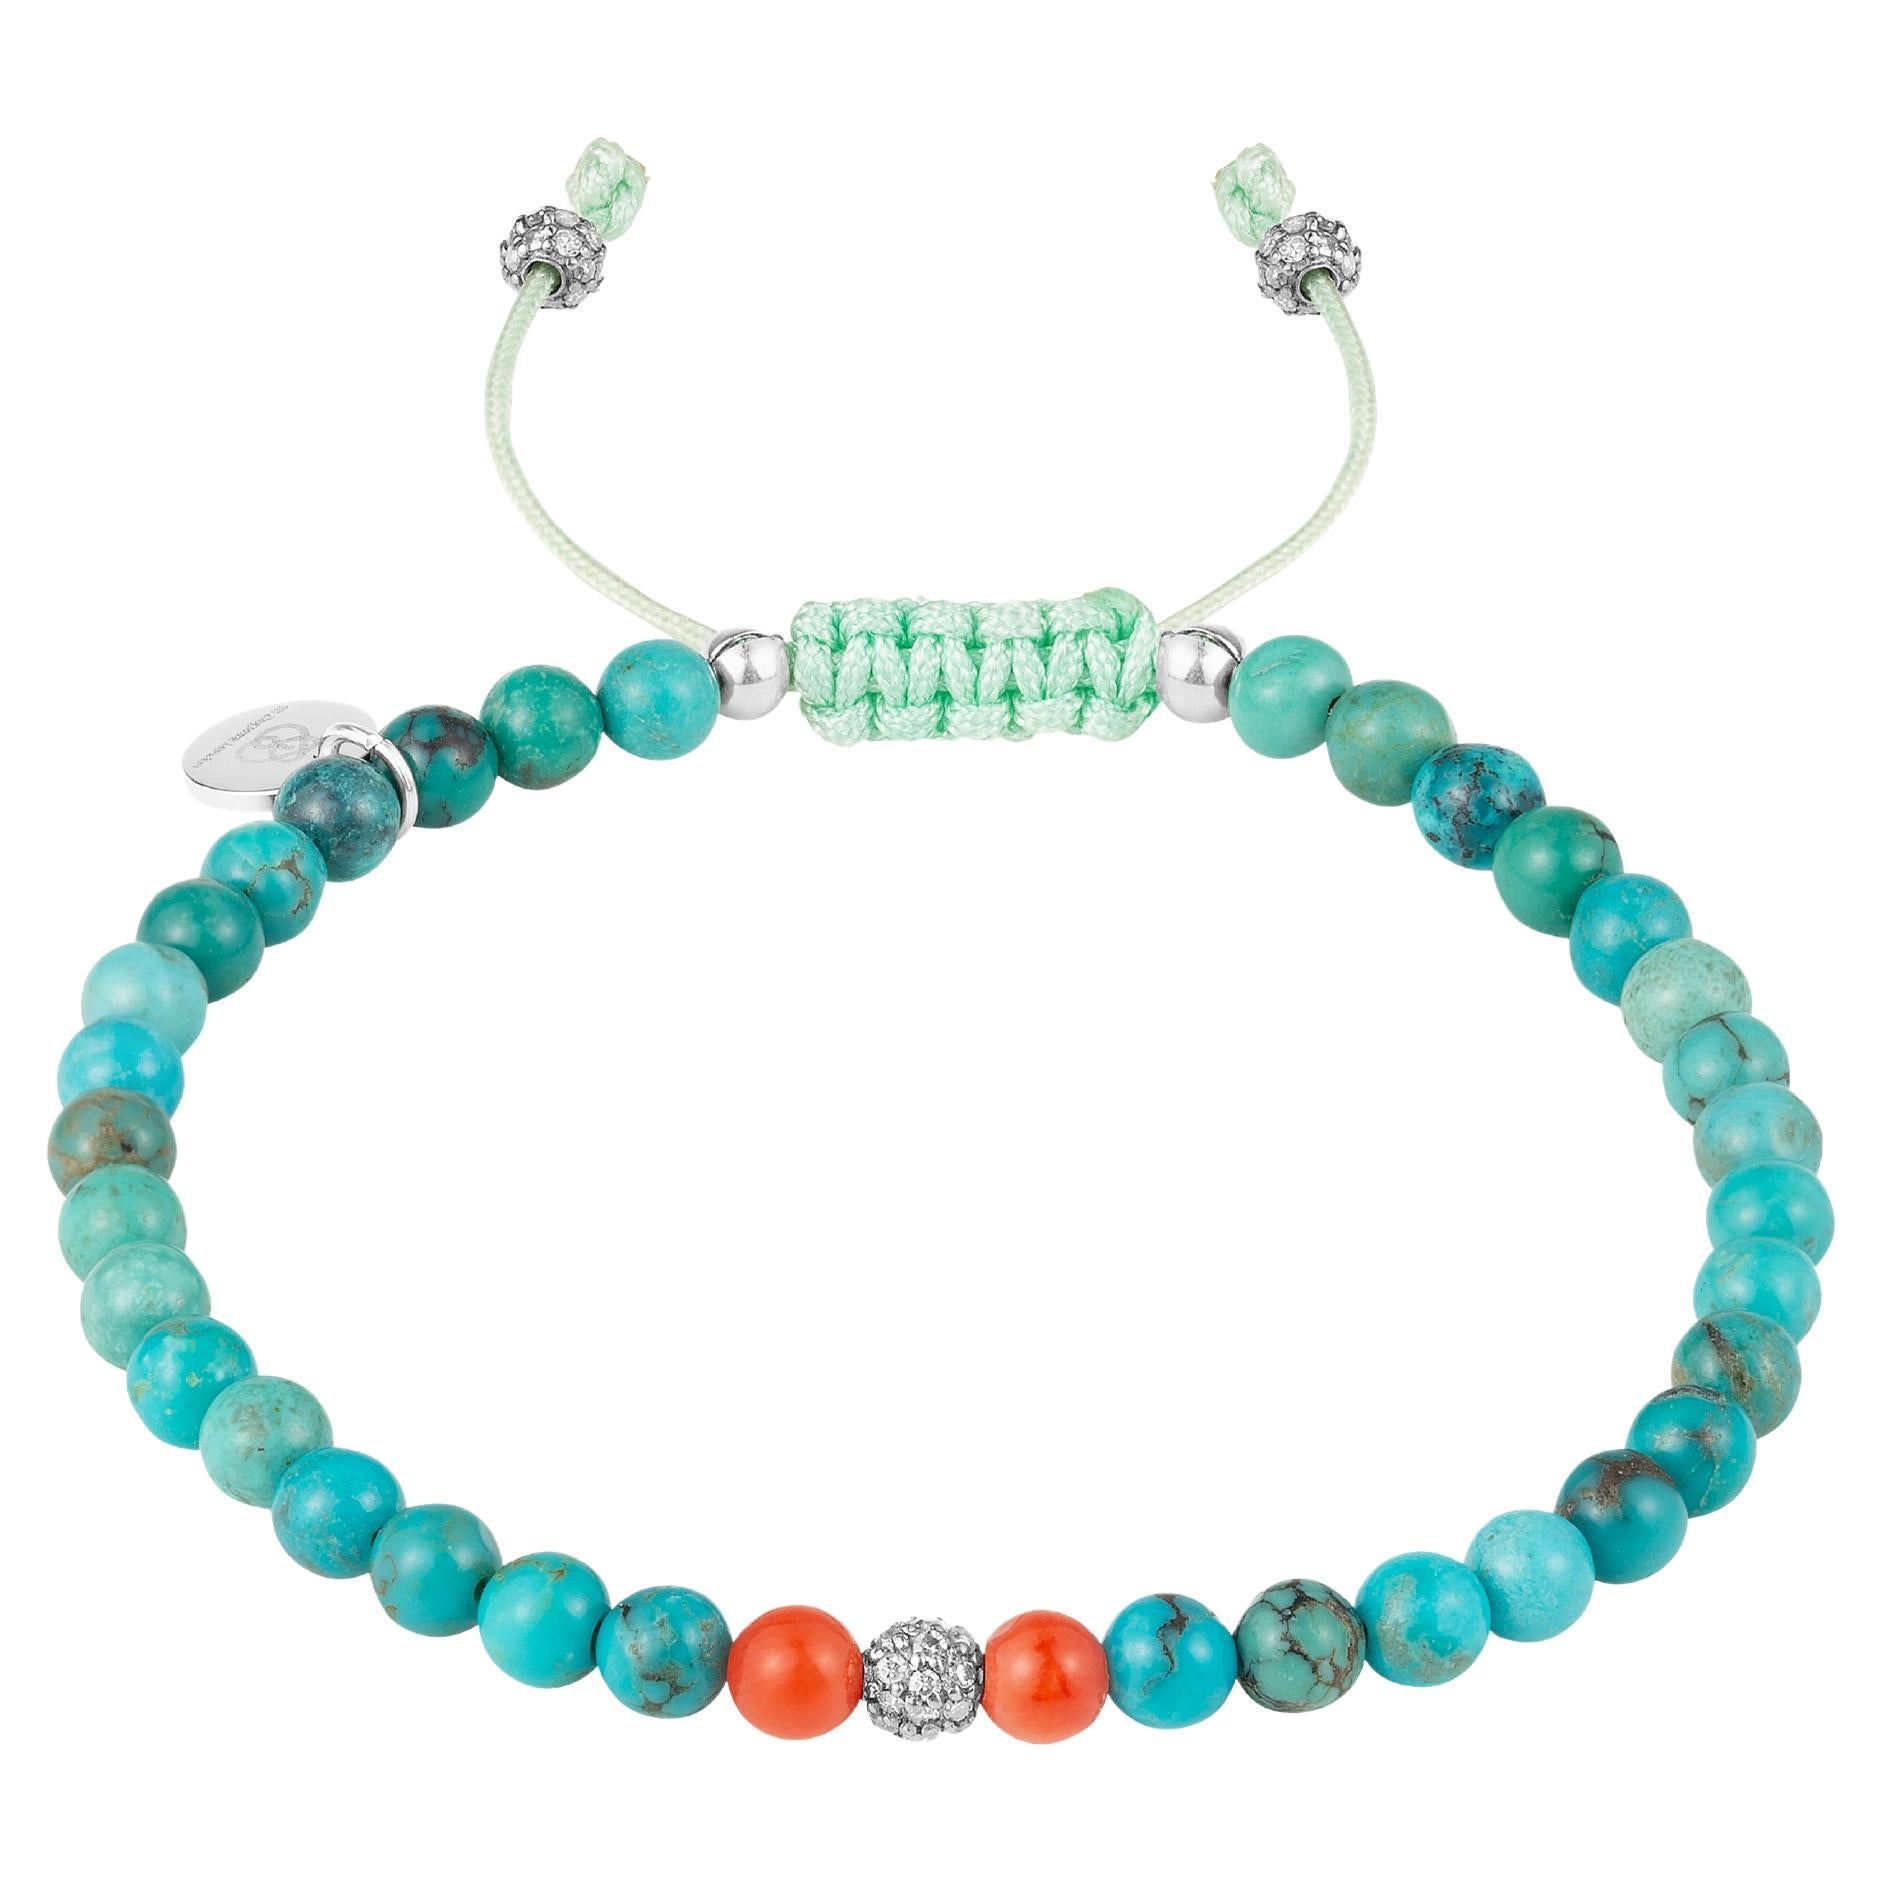 Beaded bracelet with mini natural turquoise and diamond beads